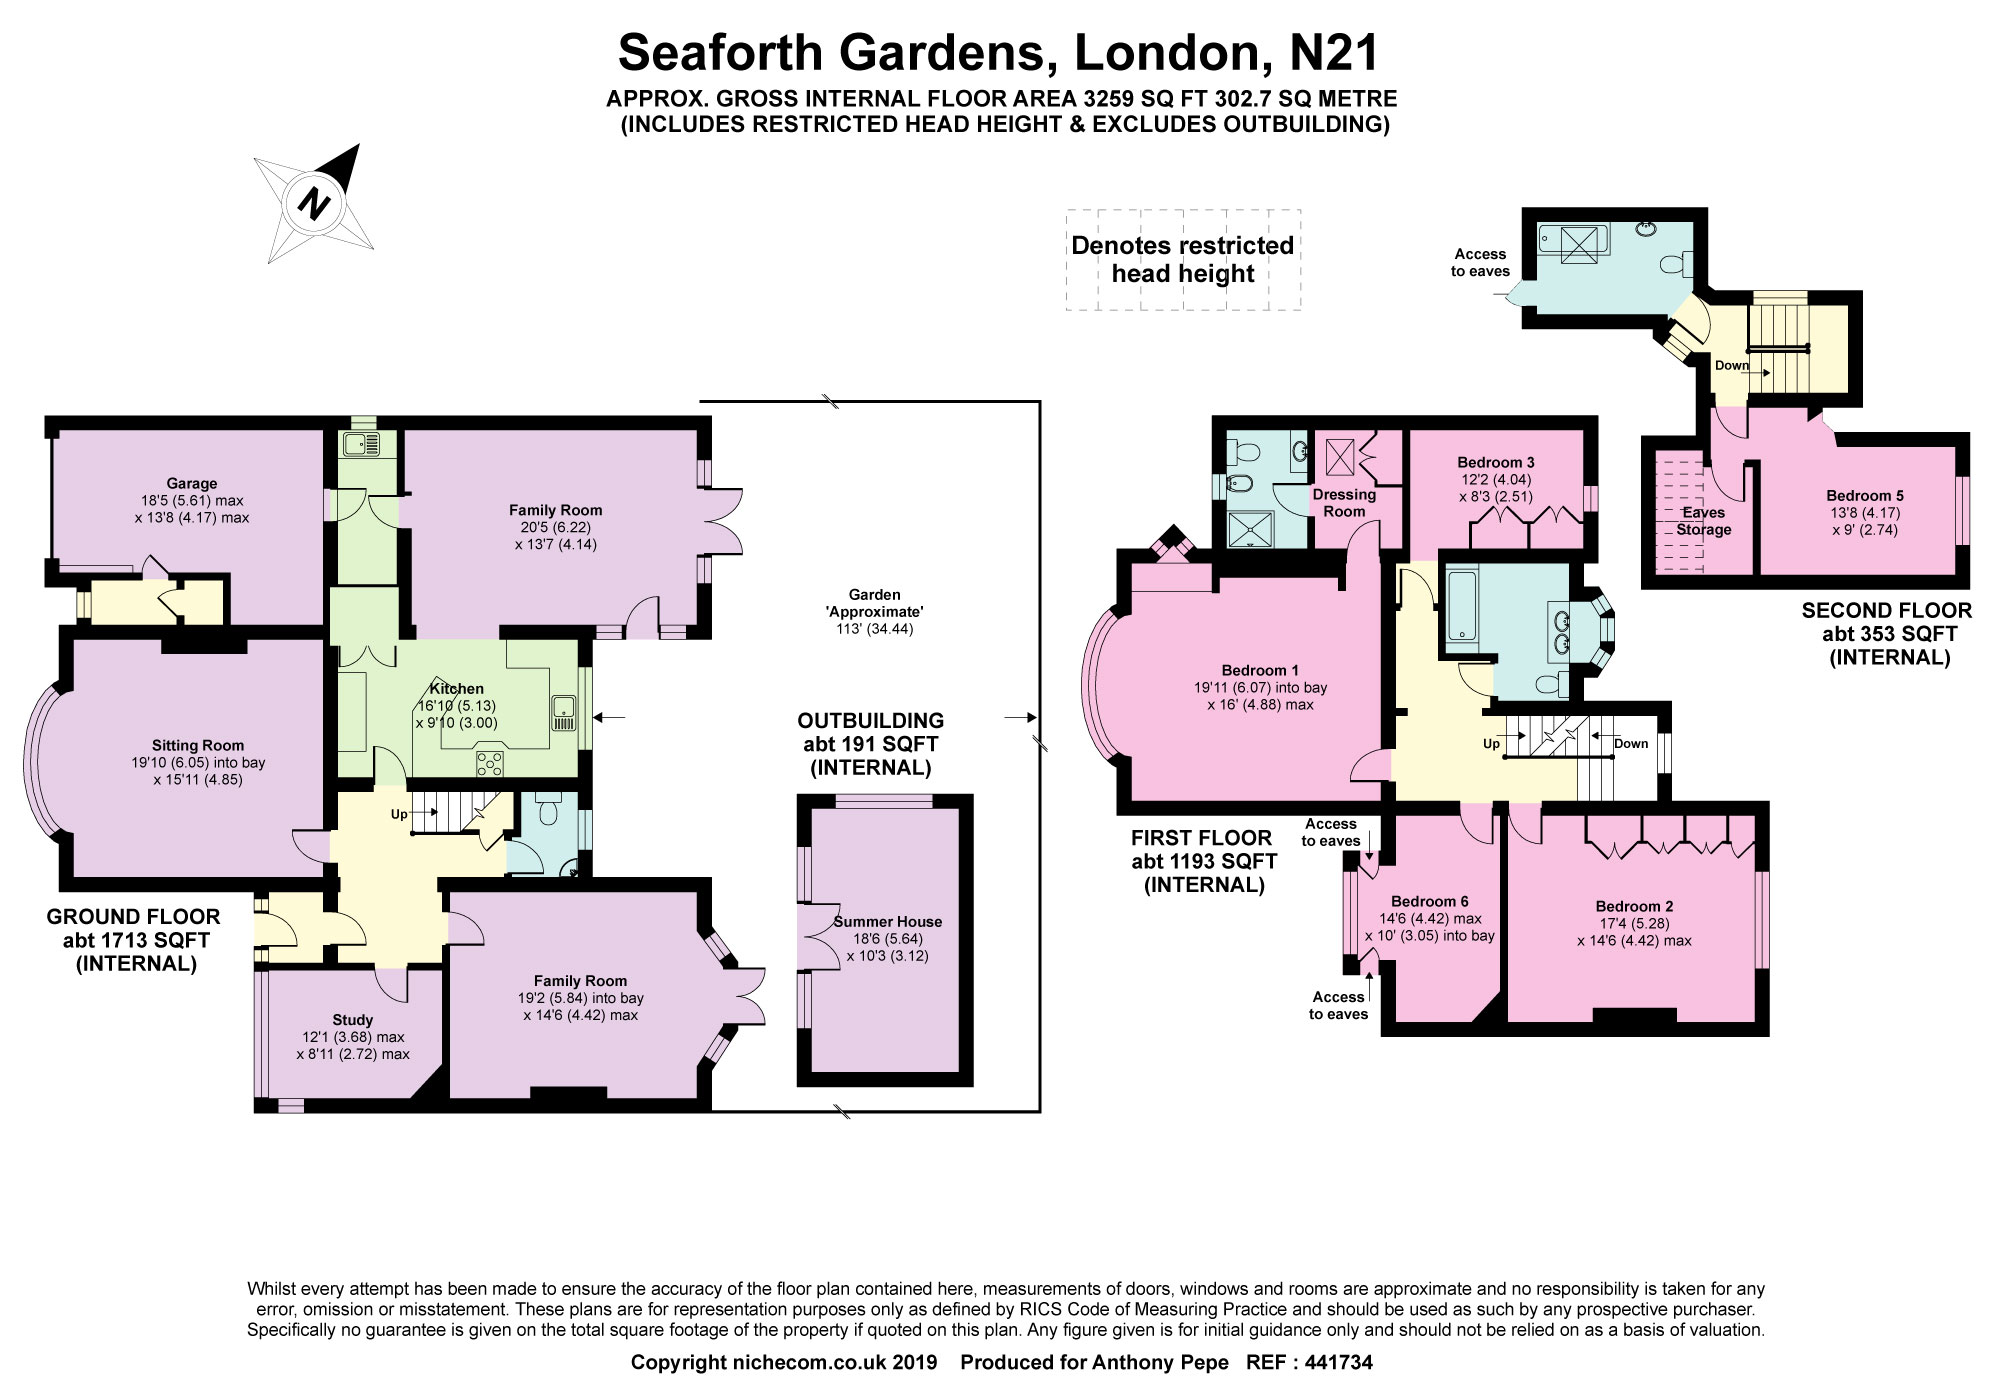 5 Bedrooms Detached house to rent in Seaforth Gardens, Winchmore Hill, London N21